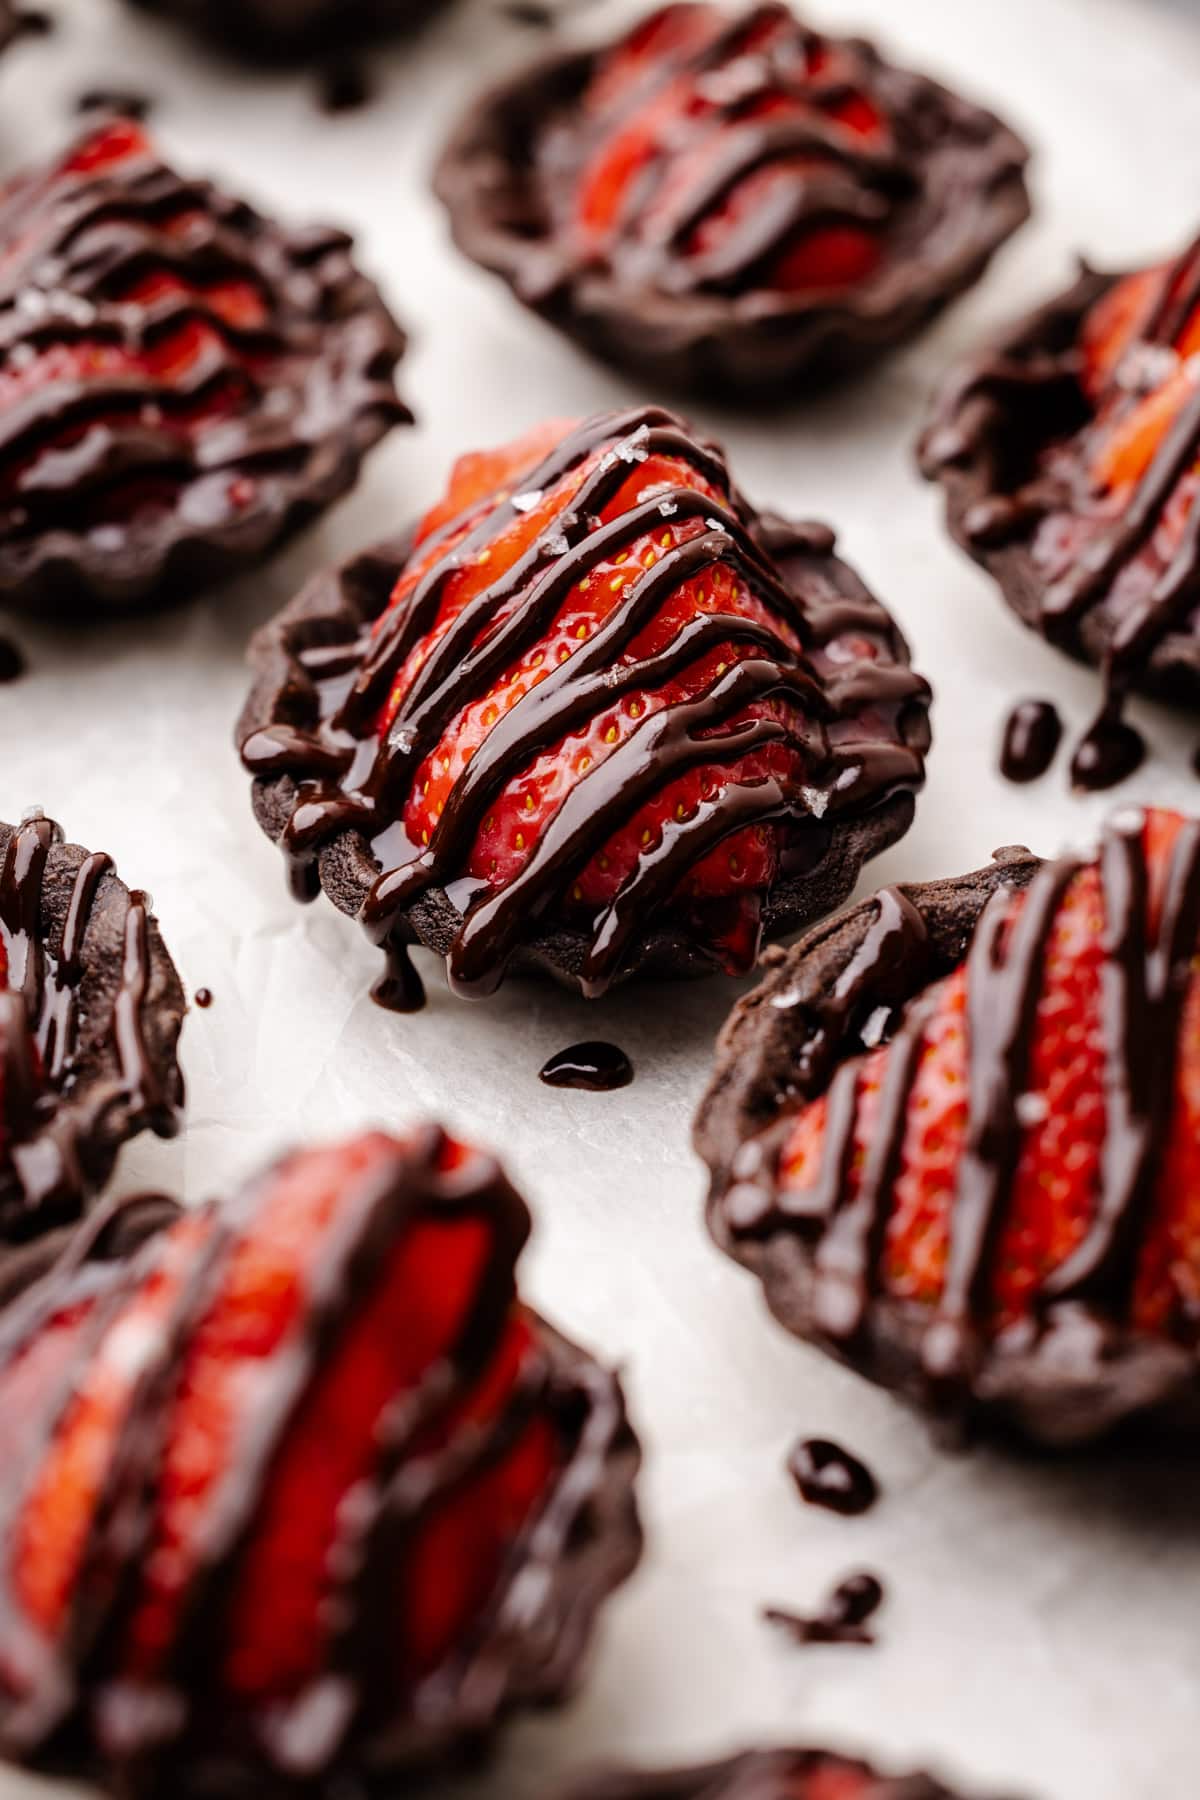 Chocolate strawberry tarts drizzled with melted chocolate.